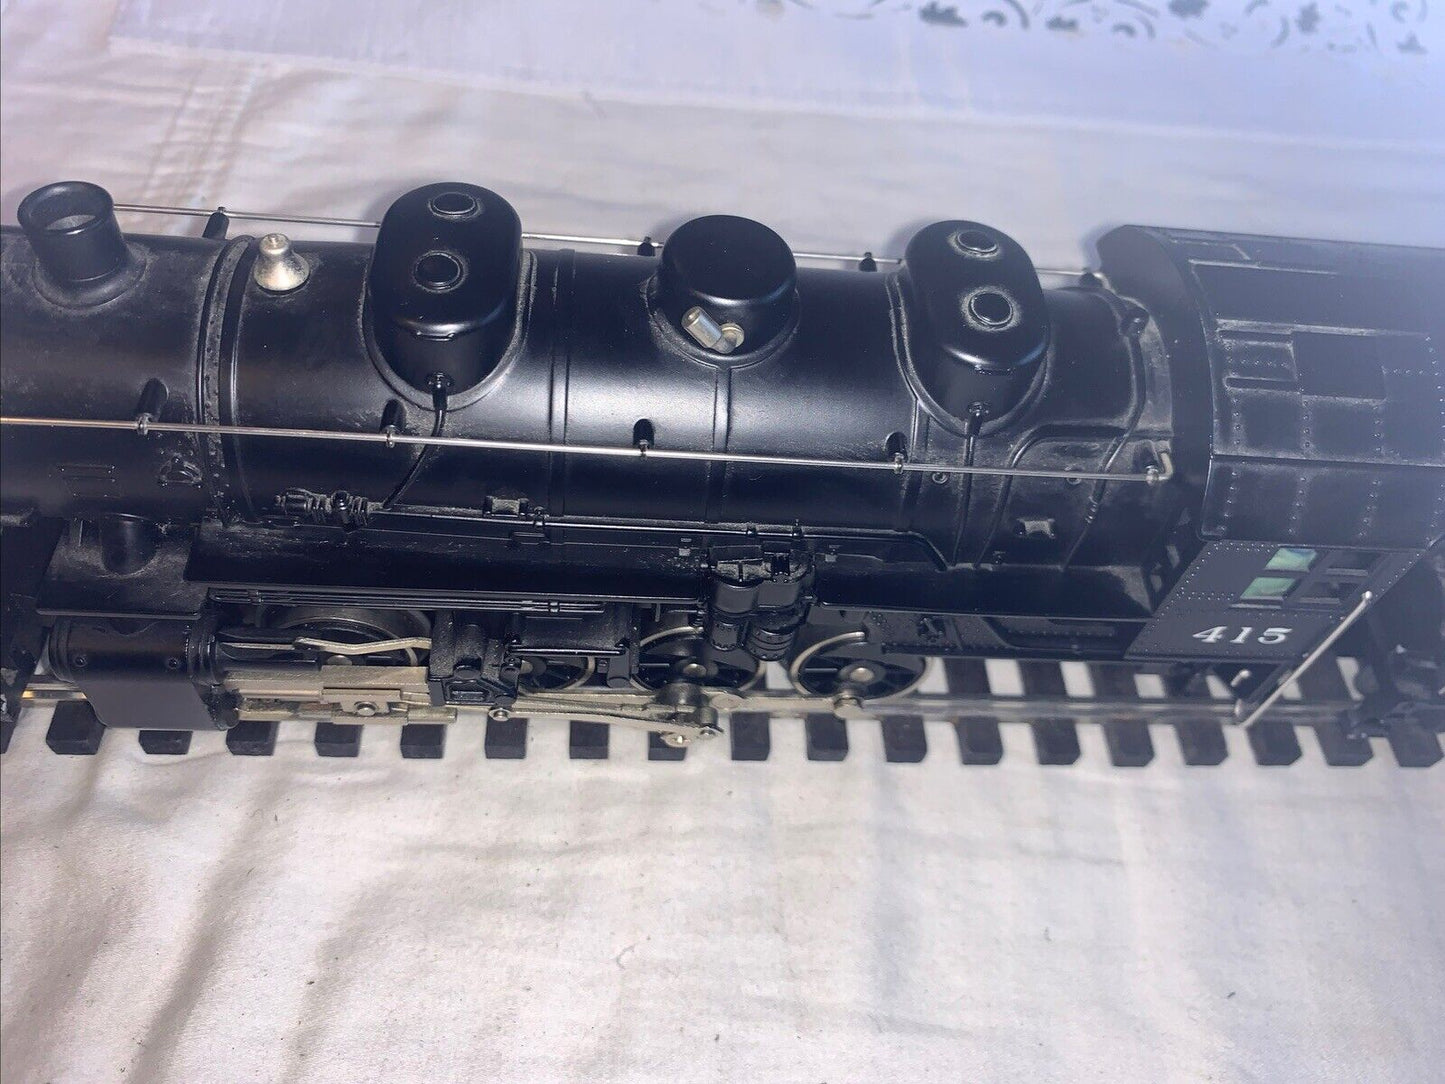 🚂 MTH O Gauge 30-1123-1 NYC 0-8-0 Steam Switcher in OB. TESTED!! C-7 Excellent